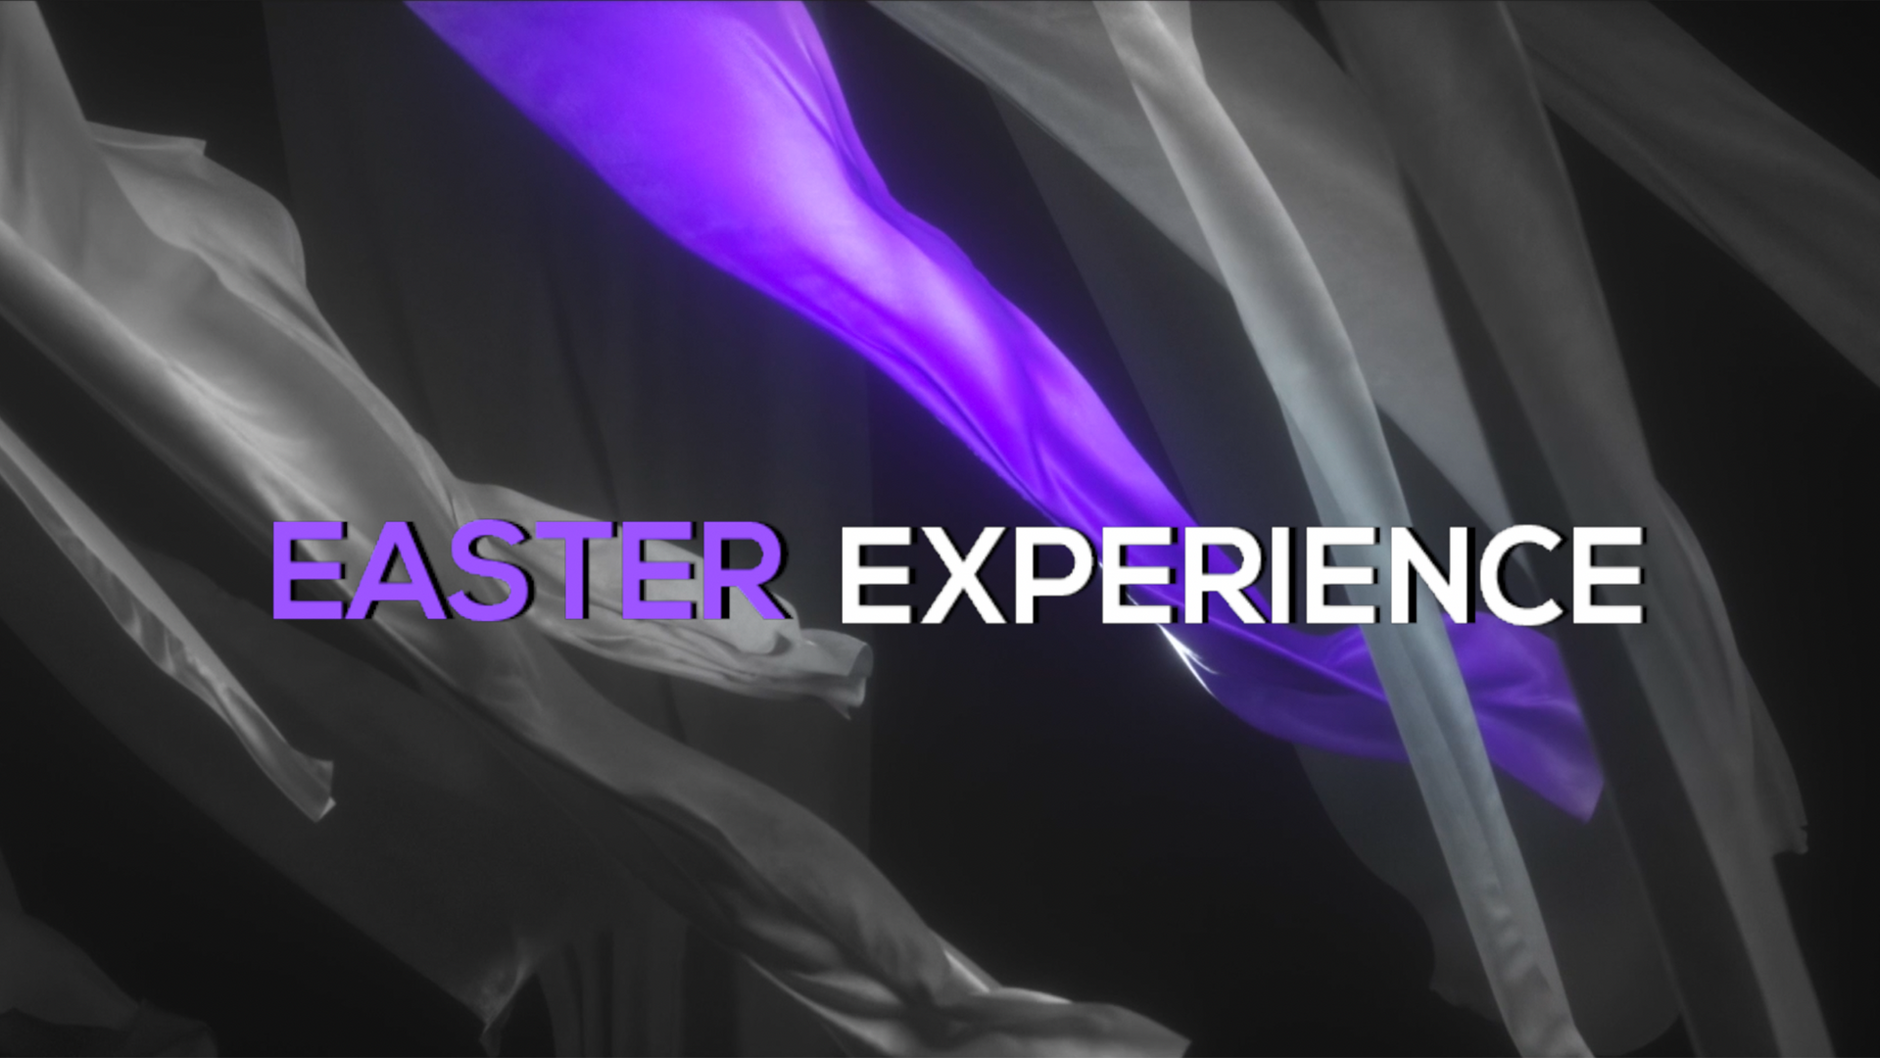 EASTER EXPERIENCE